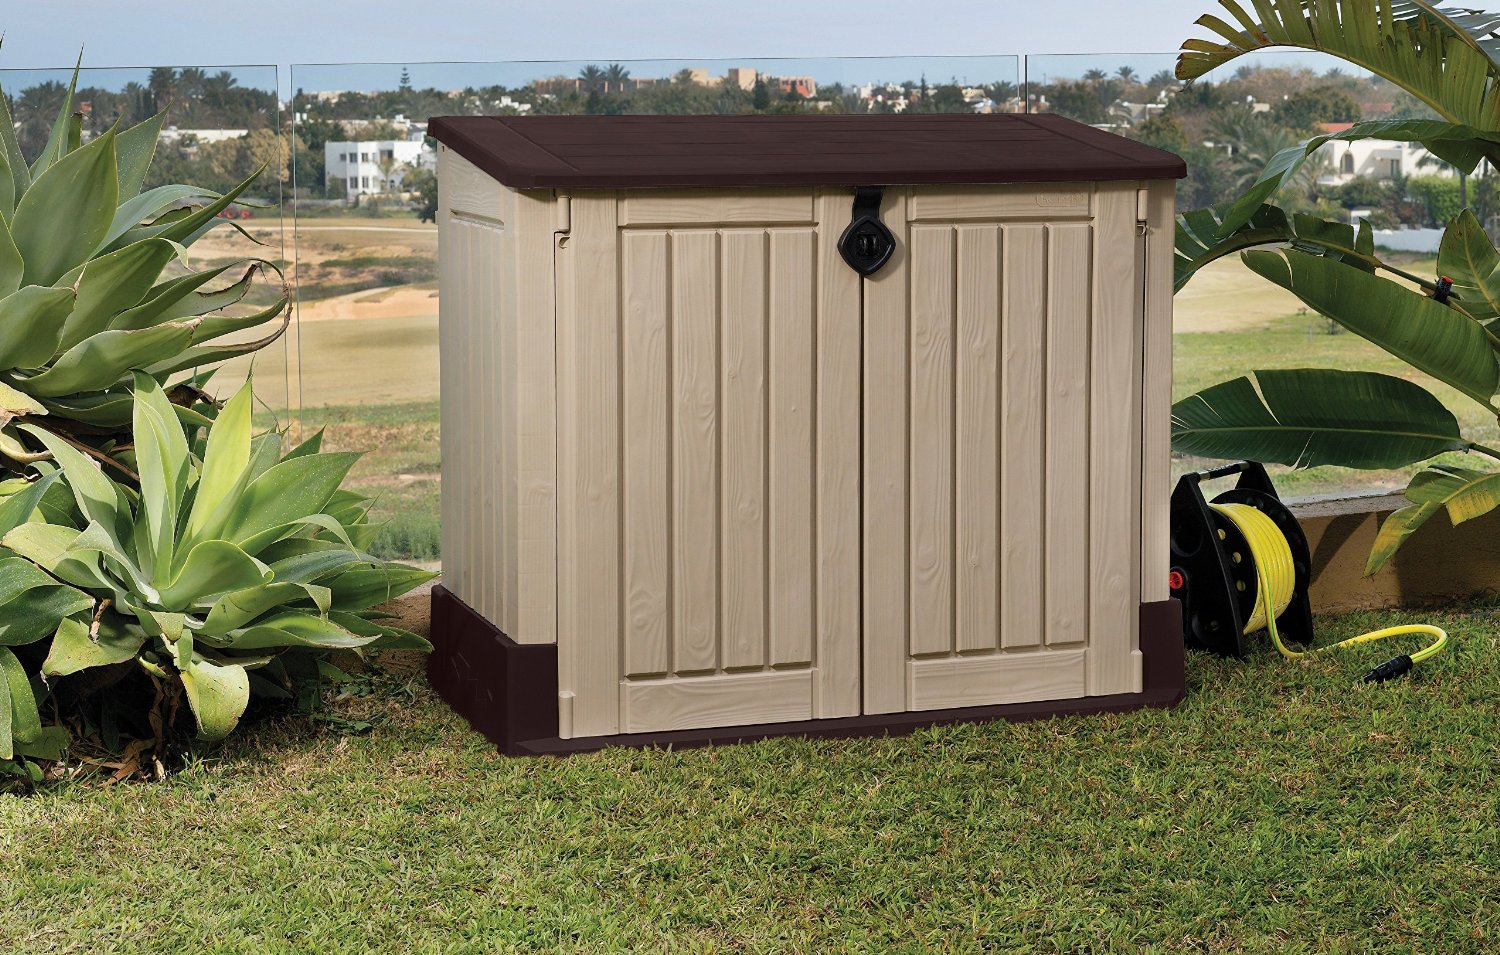 Keter Store-It-Out Midi Resin Outdoor Garden Storage Shed - Beige/Brown